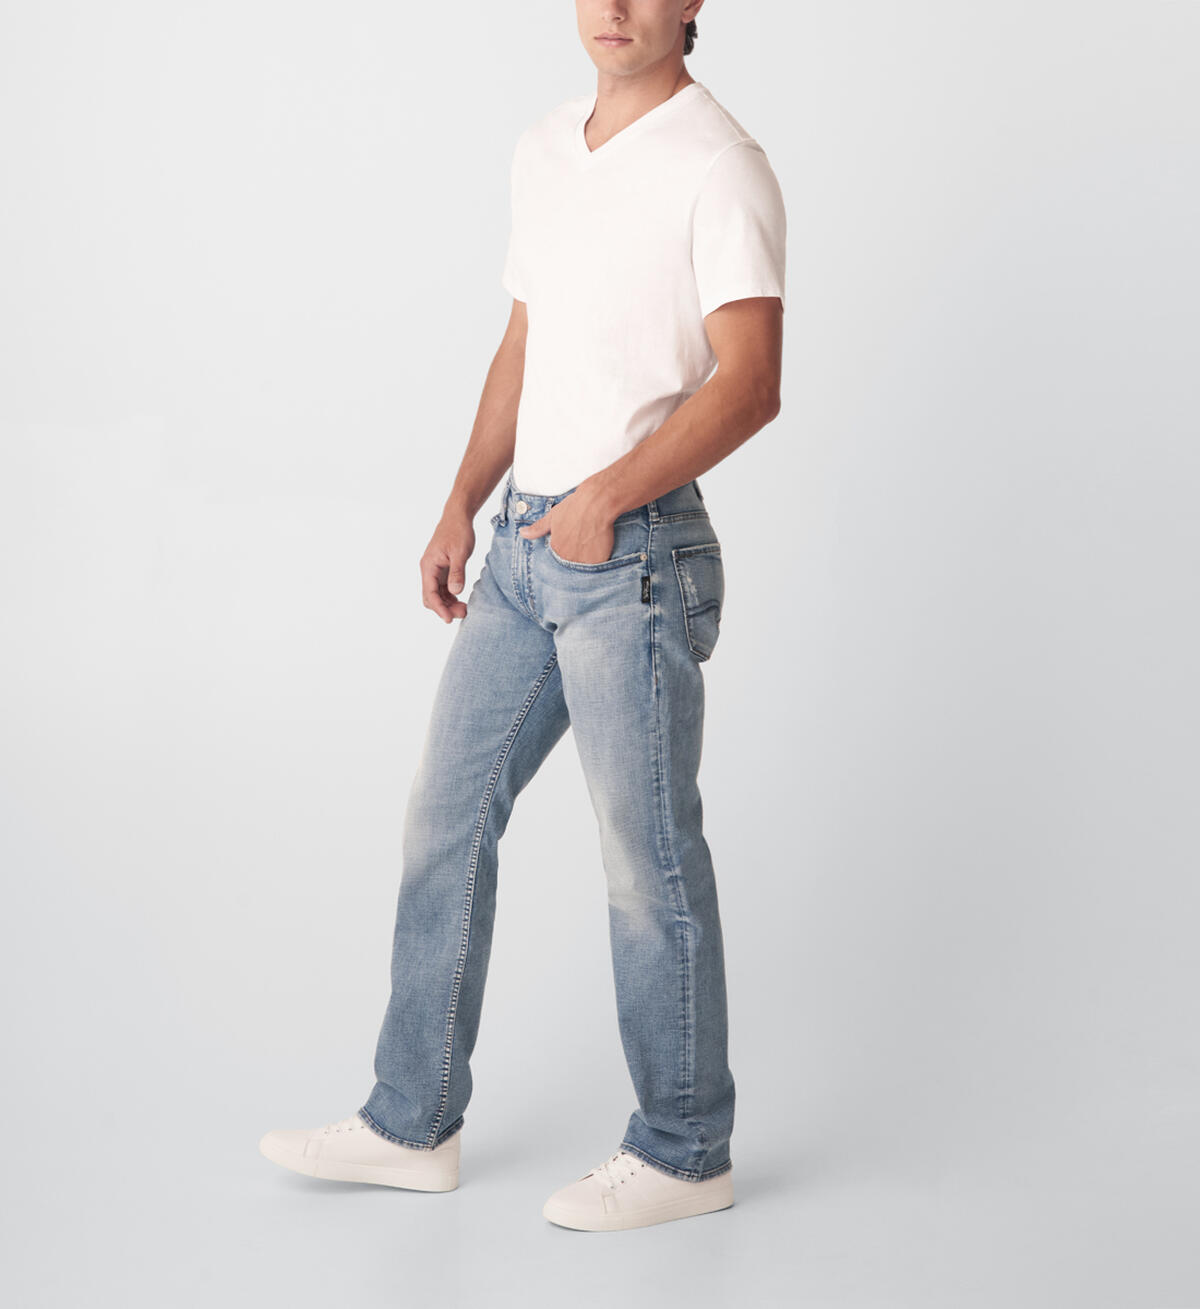 Allan Classic Fit Straight Leg Jeans, , hi-res image number 2